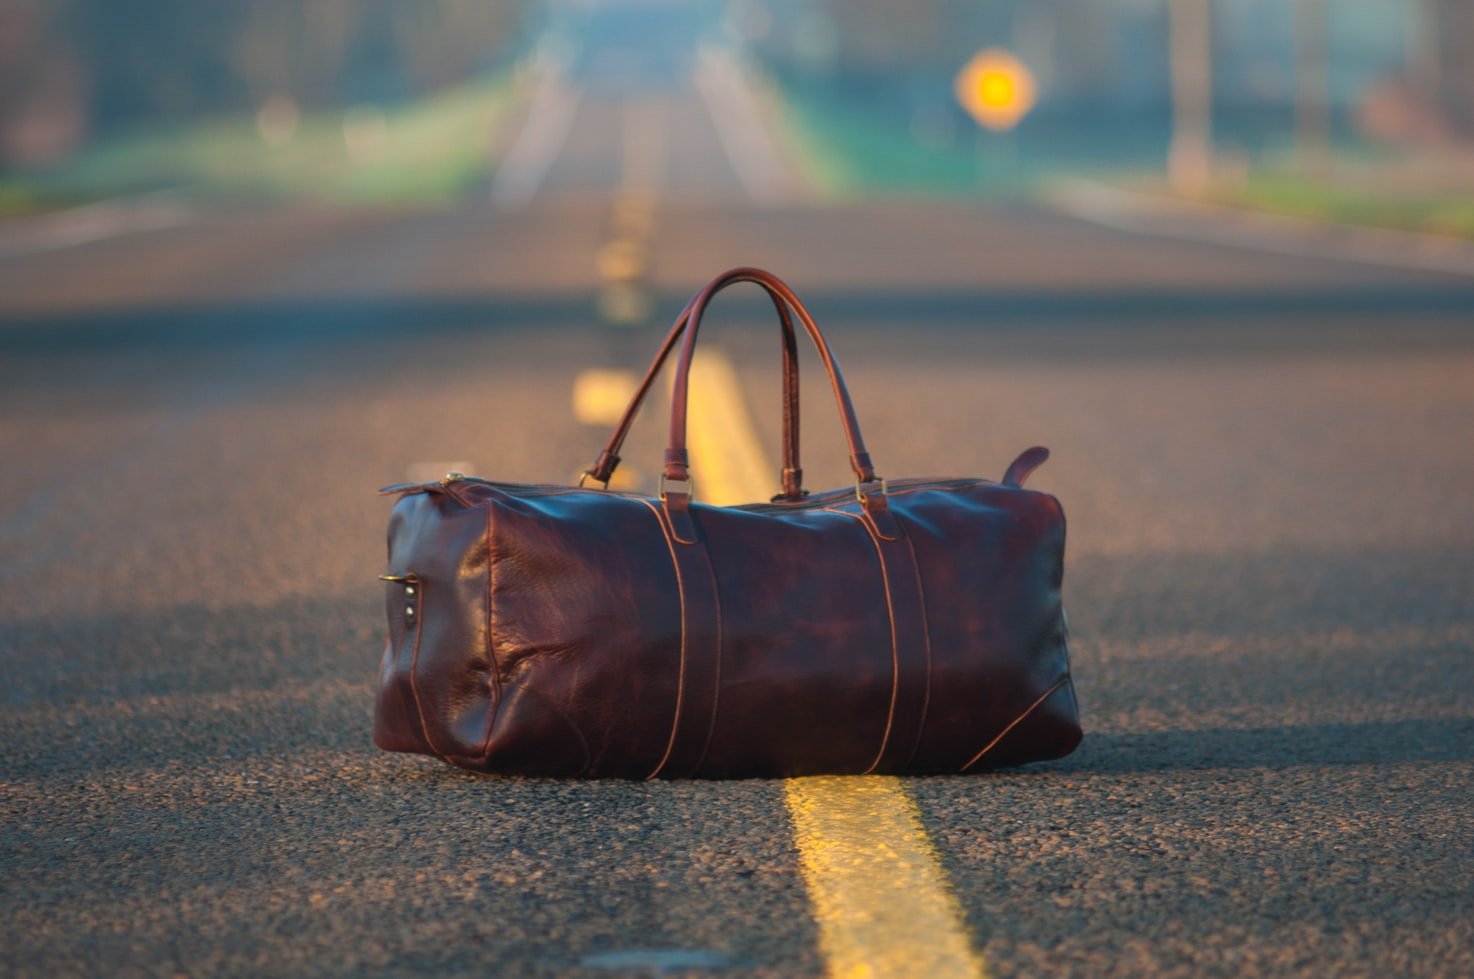 Someone had left a bag in the back of the bus | Source: Unsplash